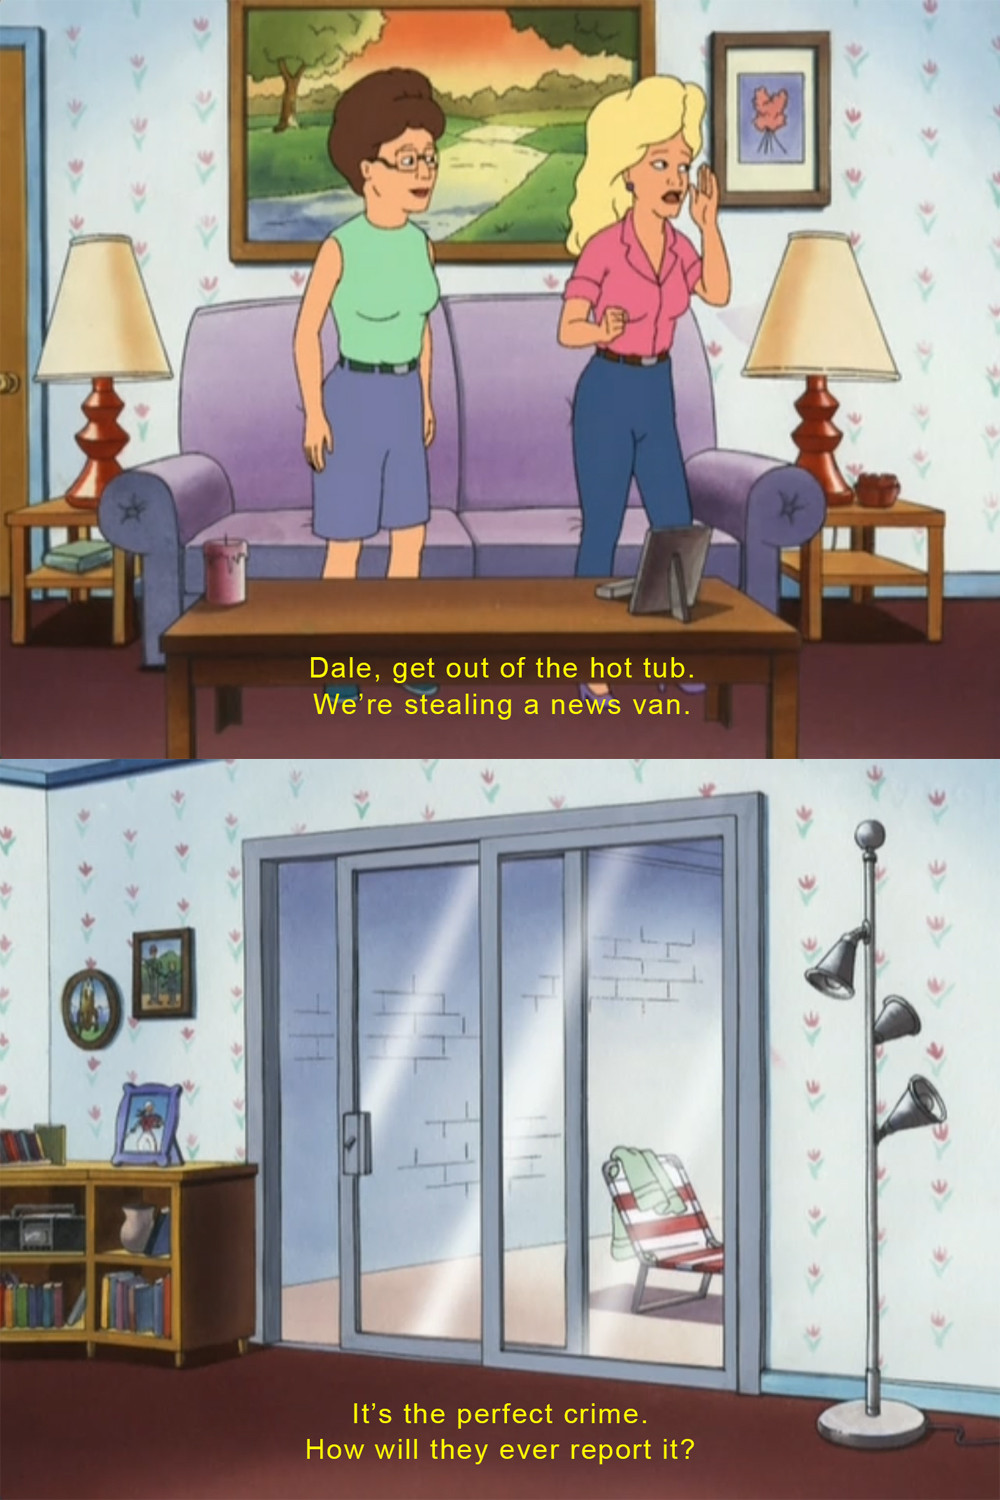 Dale Gribble from the King of the Hill comments to his wife on stealing a van. He says it's the perfect crime because how will they report it.